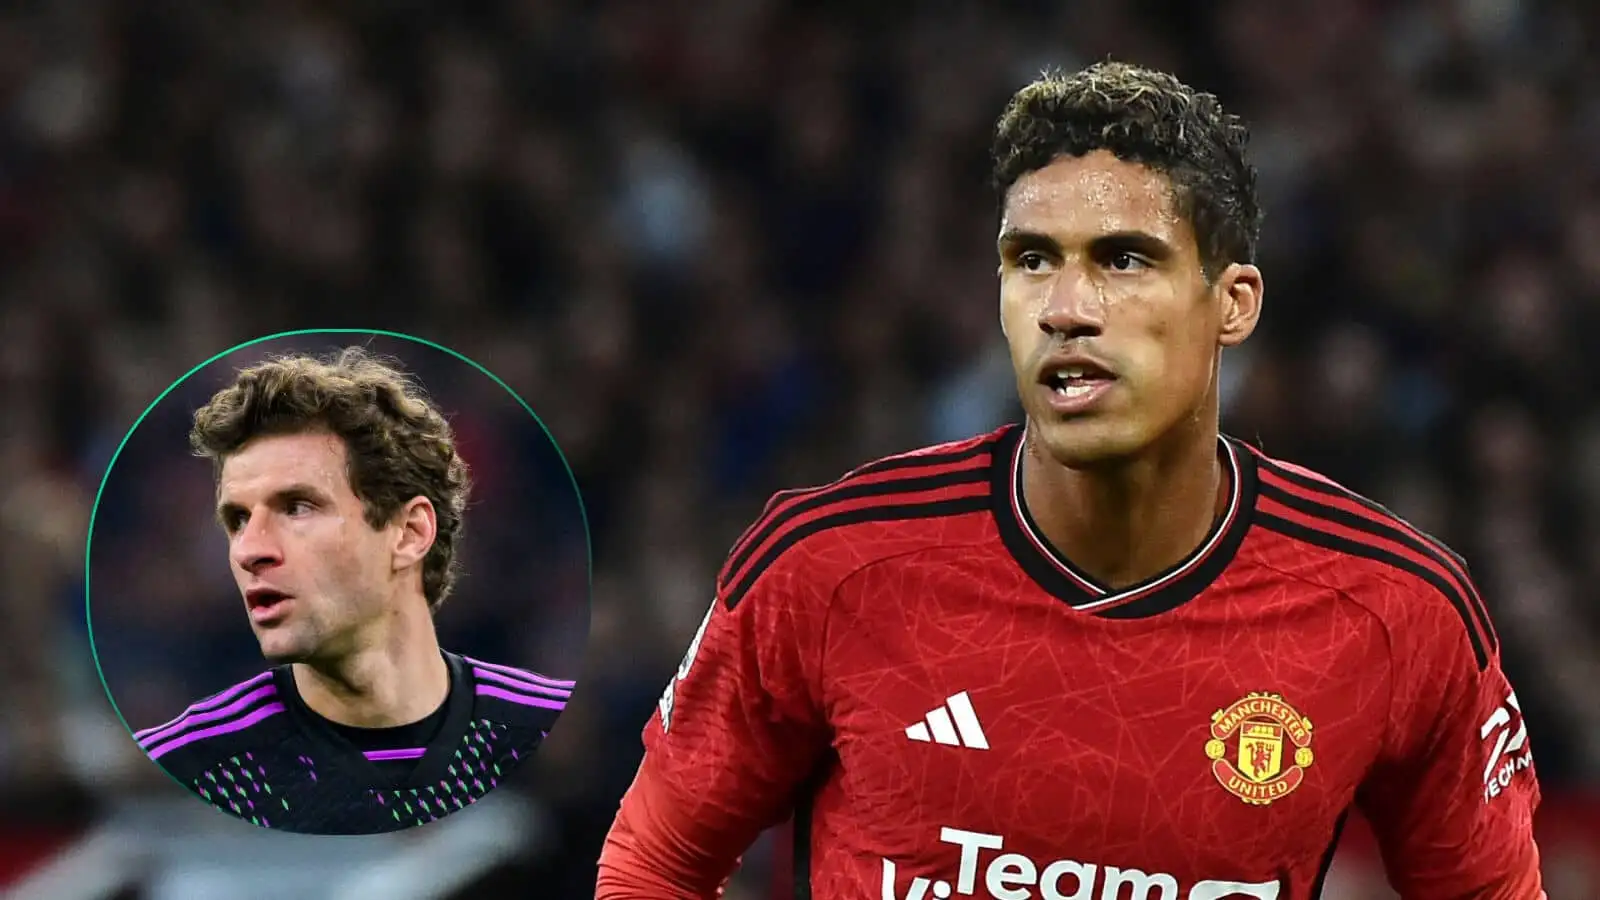 Bayern Munich forward Thomas Muller could be used in a swap for Raphael Varane